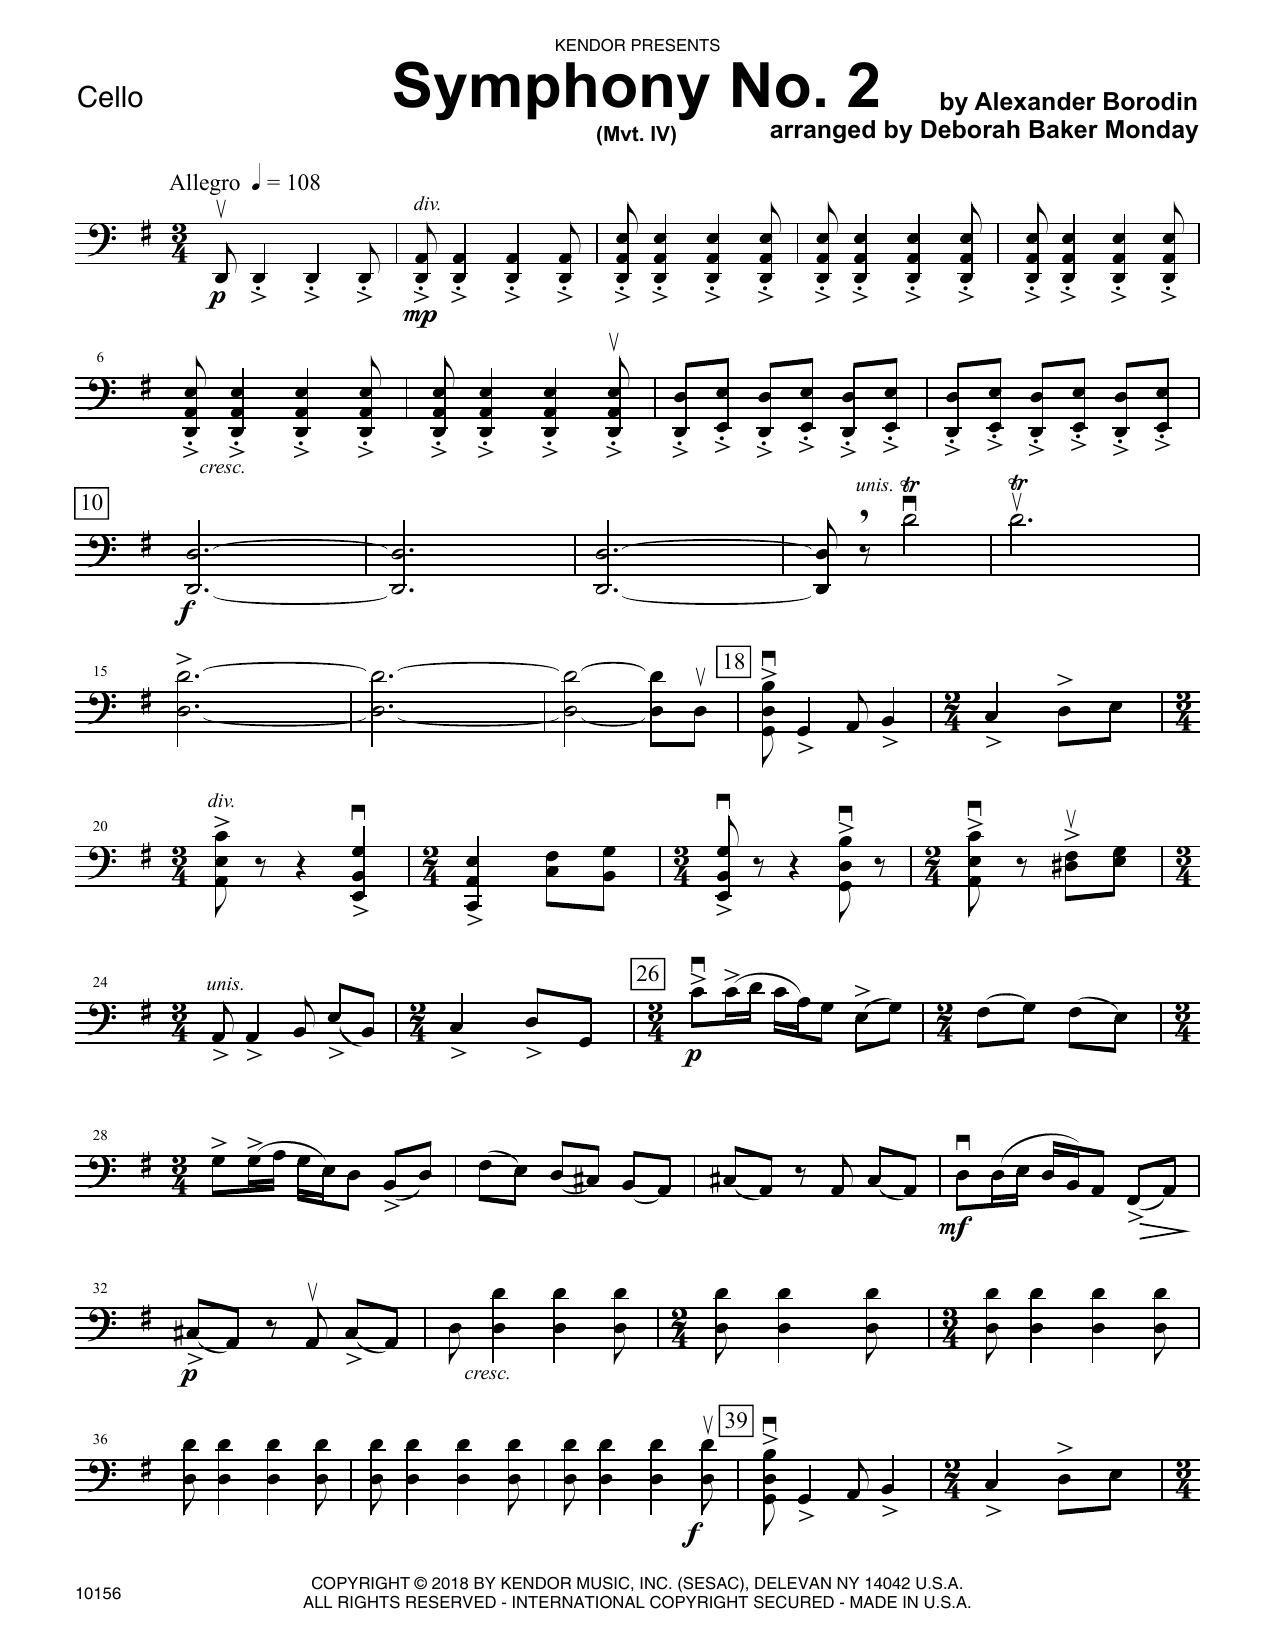 Deborah Baker Monday Symphony No. 2 (Mvt. IV) - Cello sheet music preview music notes and score for Orchestra including 4 page(s)